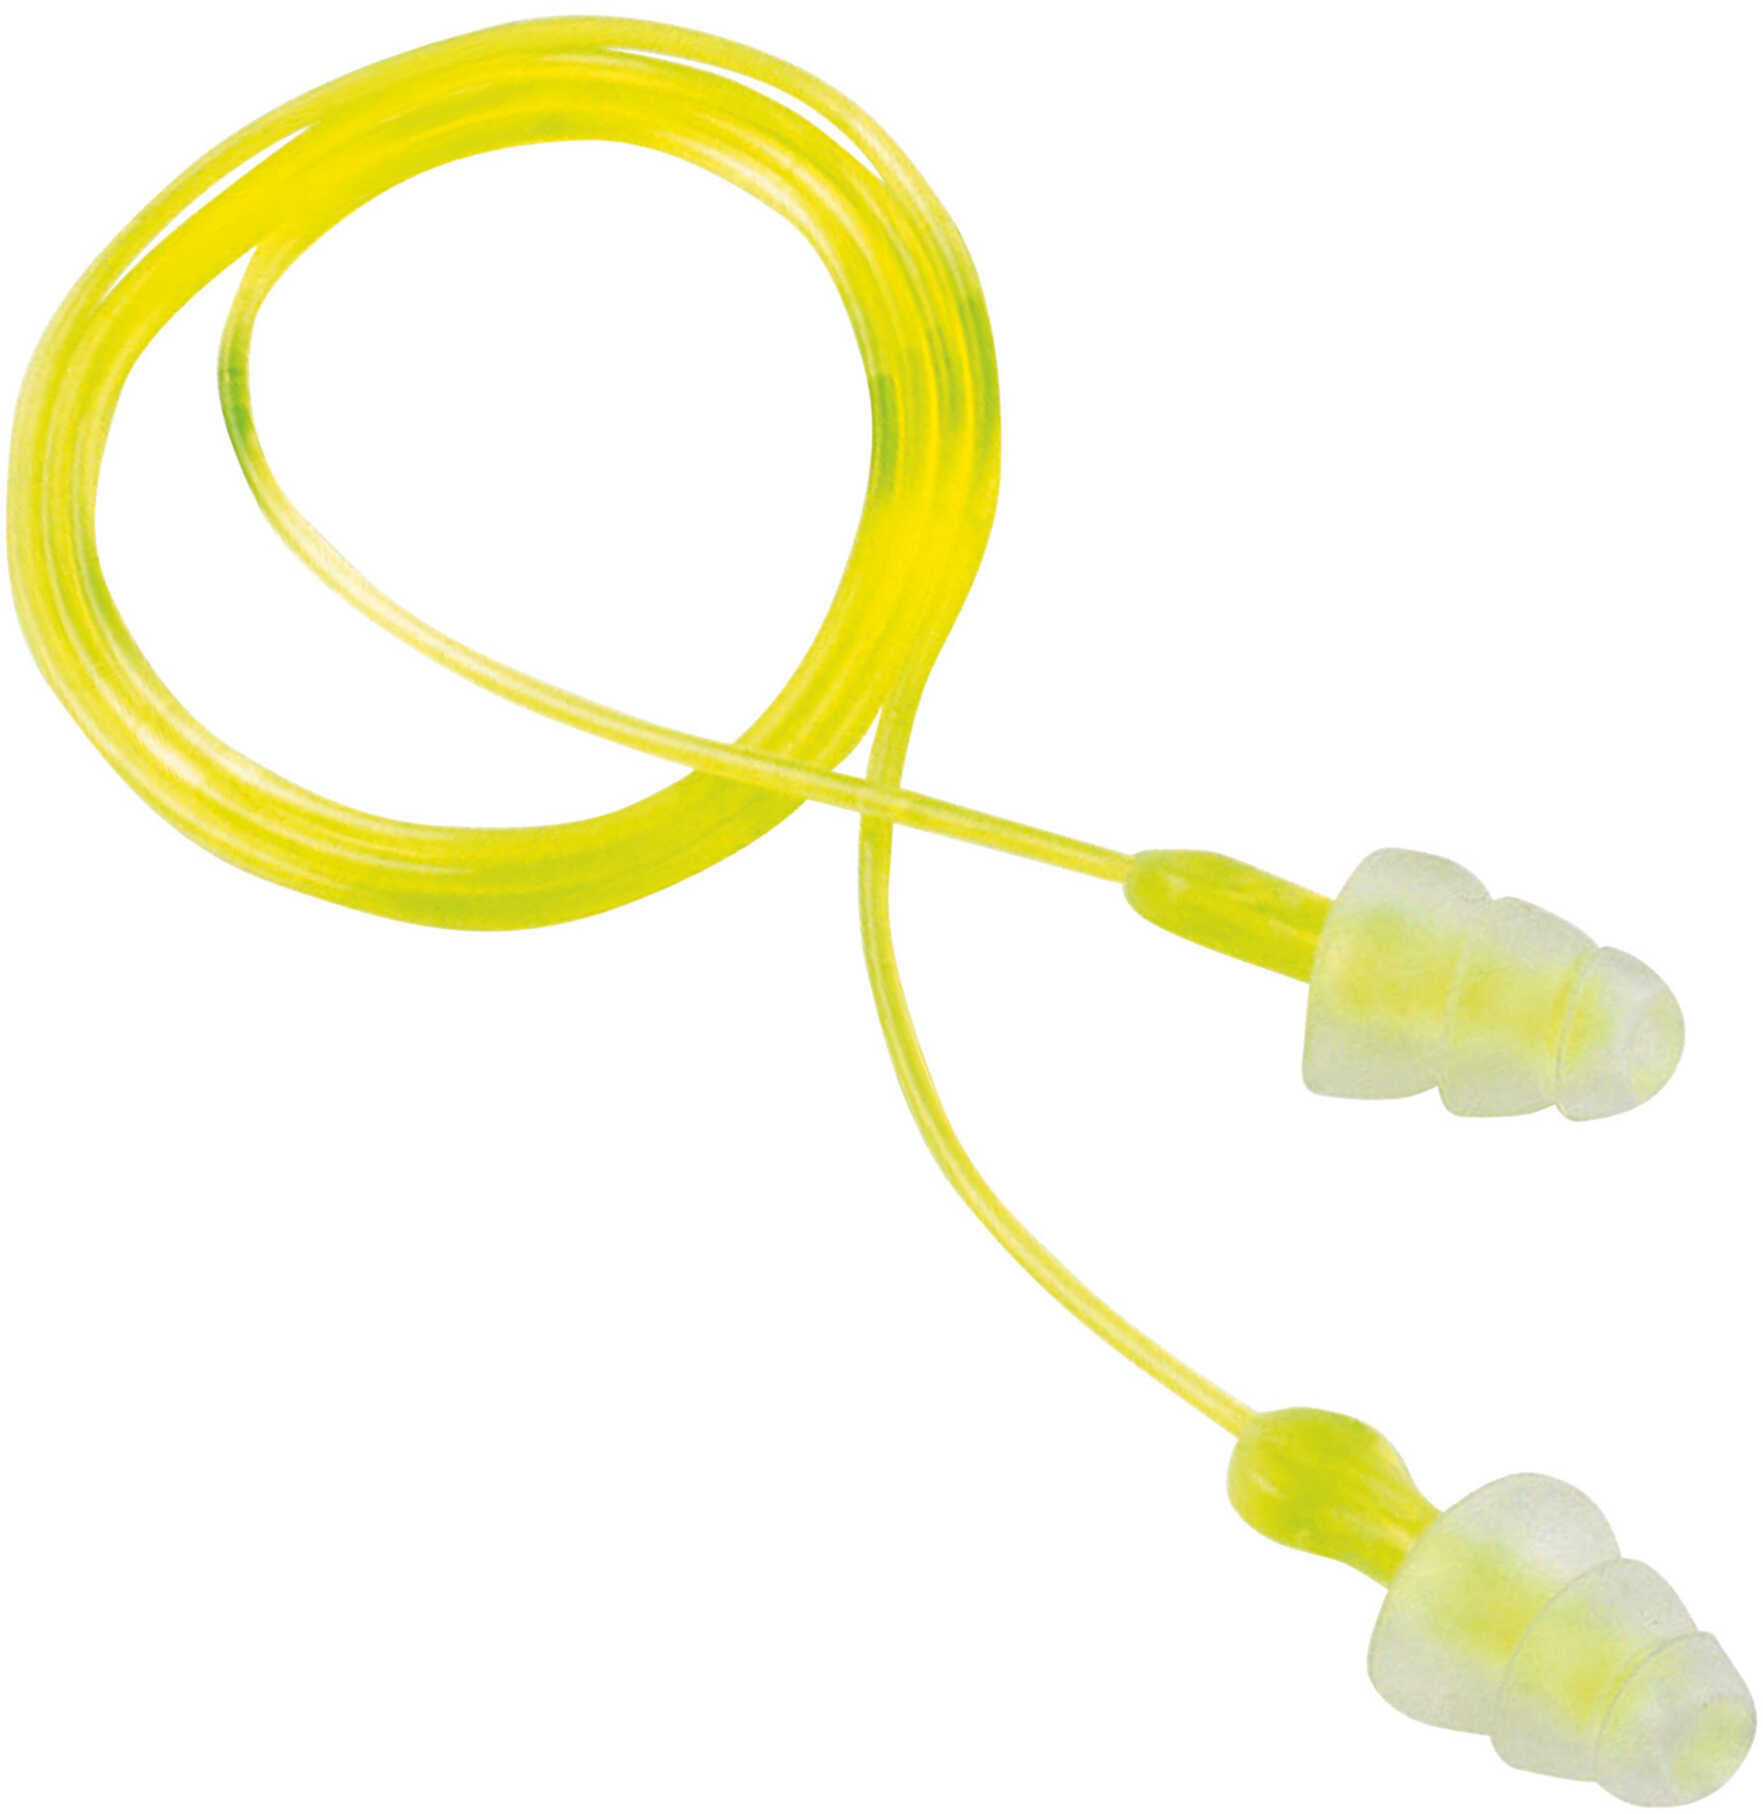 3M/Peltor Tri-Flange Ear Plug Reusable Hearing Protection With Cord 3 Pack Yellow 97317